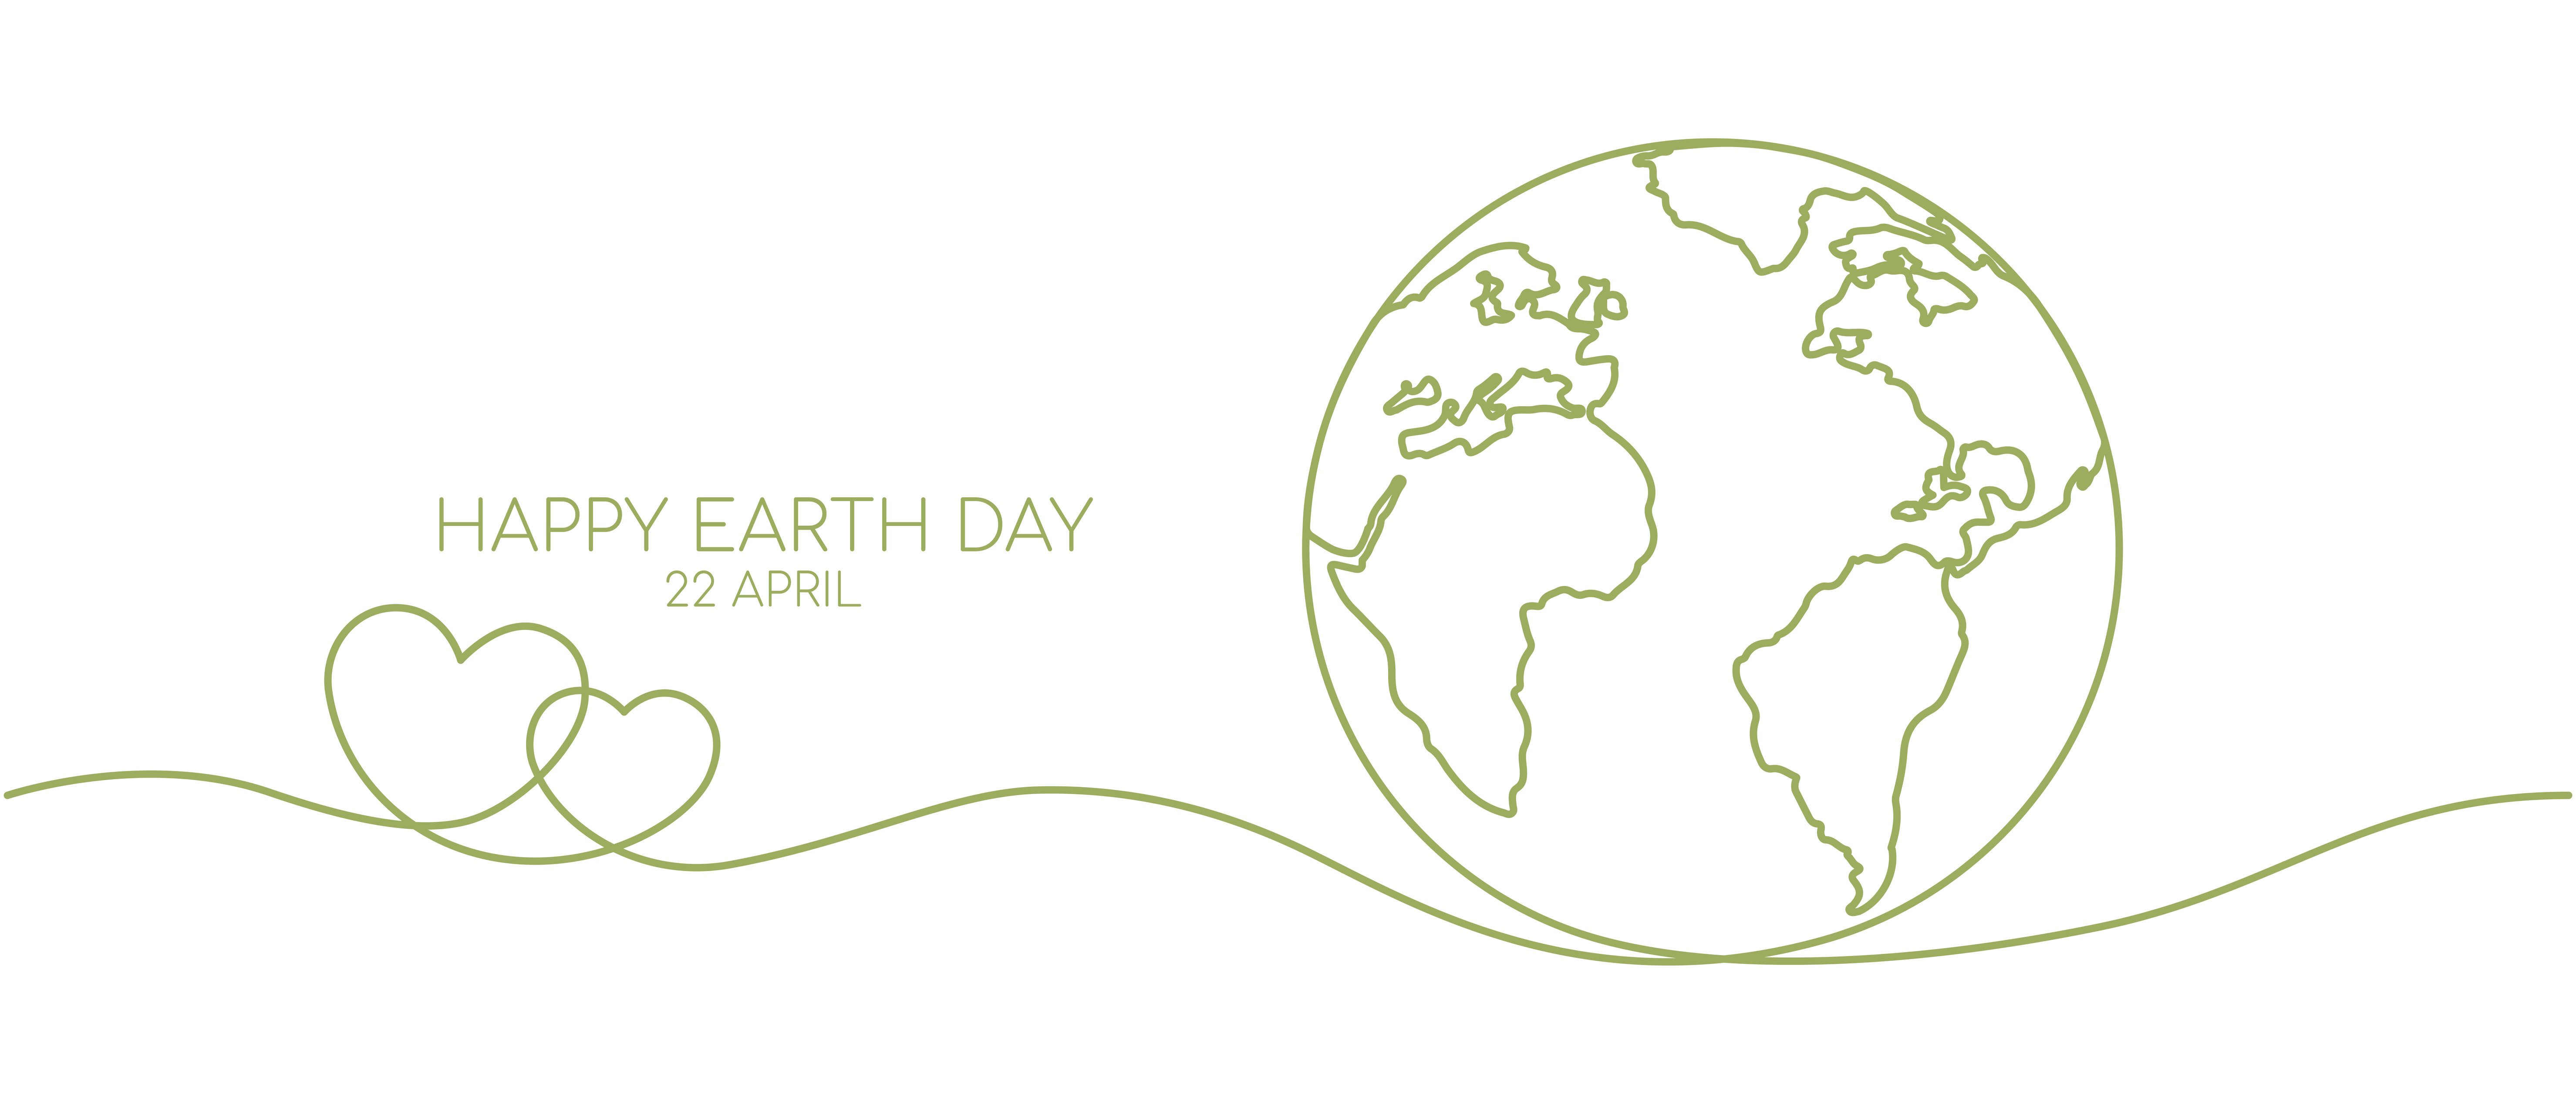 22 april: Earth Day!